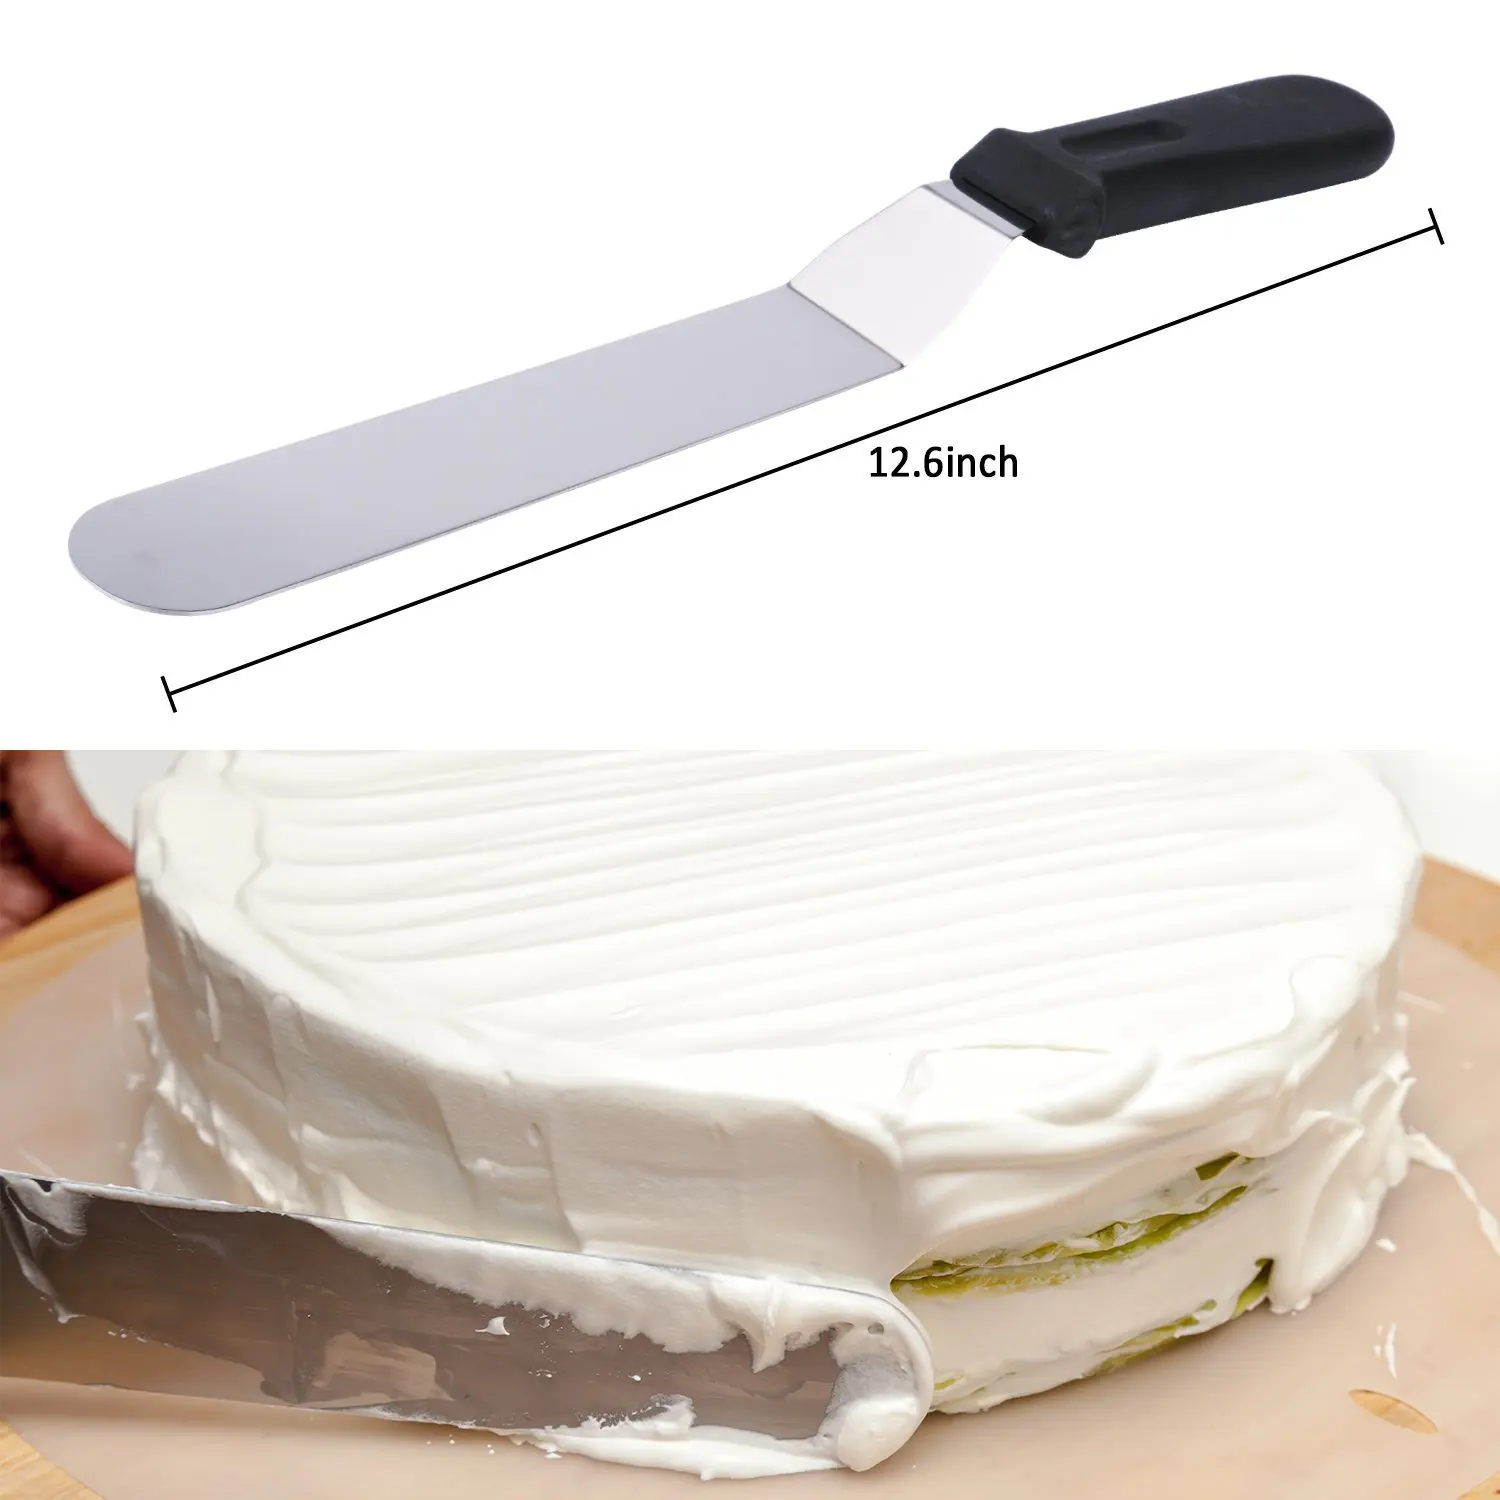 5 Pieces Beginner Adults Complete Bakeware Sets Handmade Baking Pastry Tools Baking Accessories Cake Decorating Turntable Set